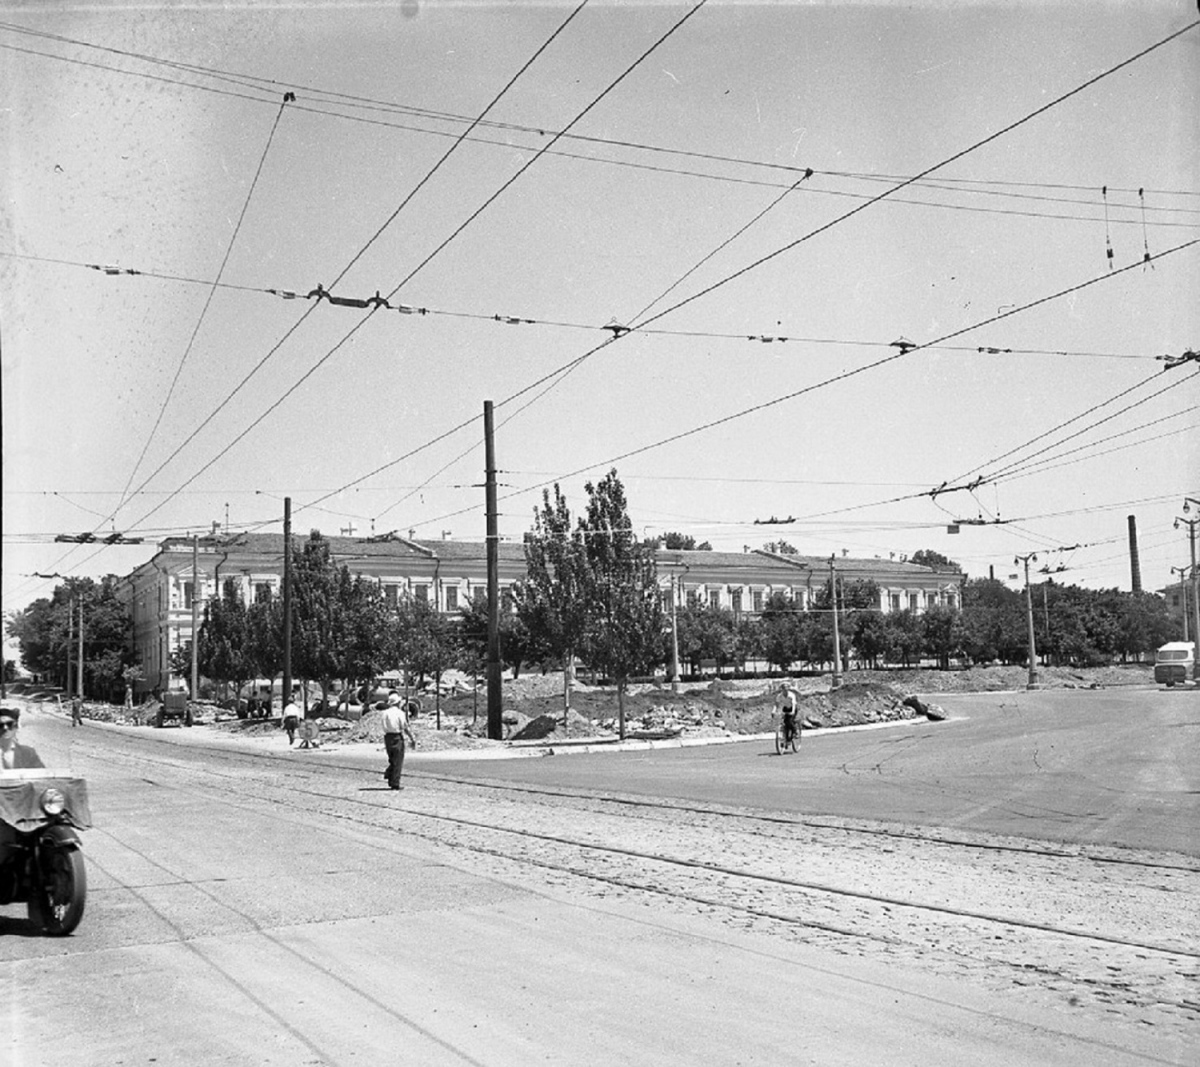 Simferopol — Old photos; Simferopol — Tramway — Lines and Infrastructure